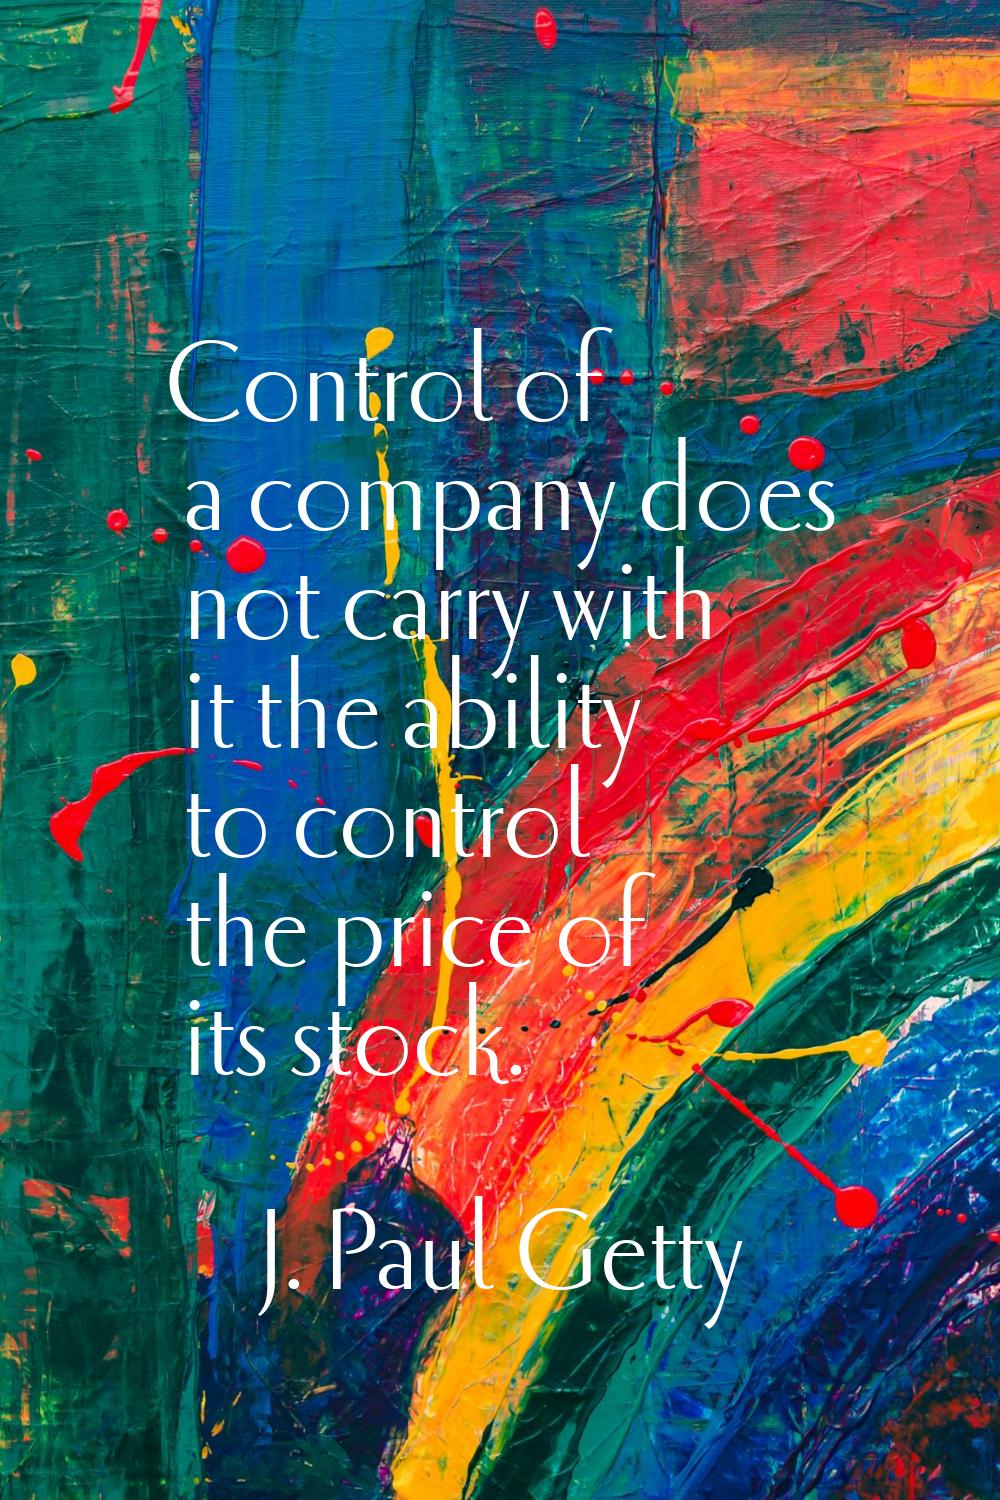 Control of a company does not carry with it the ability to control the price of its stock.